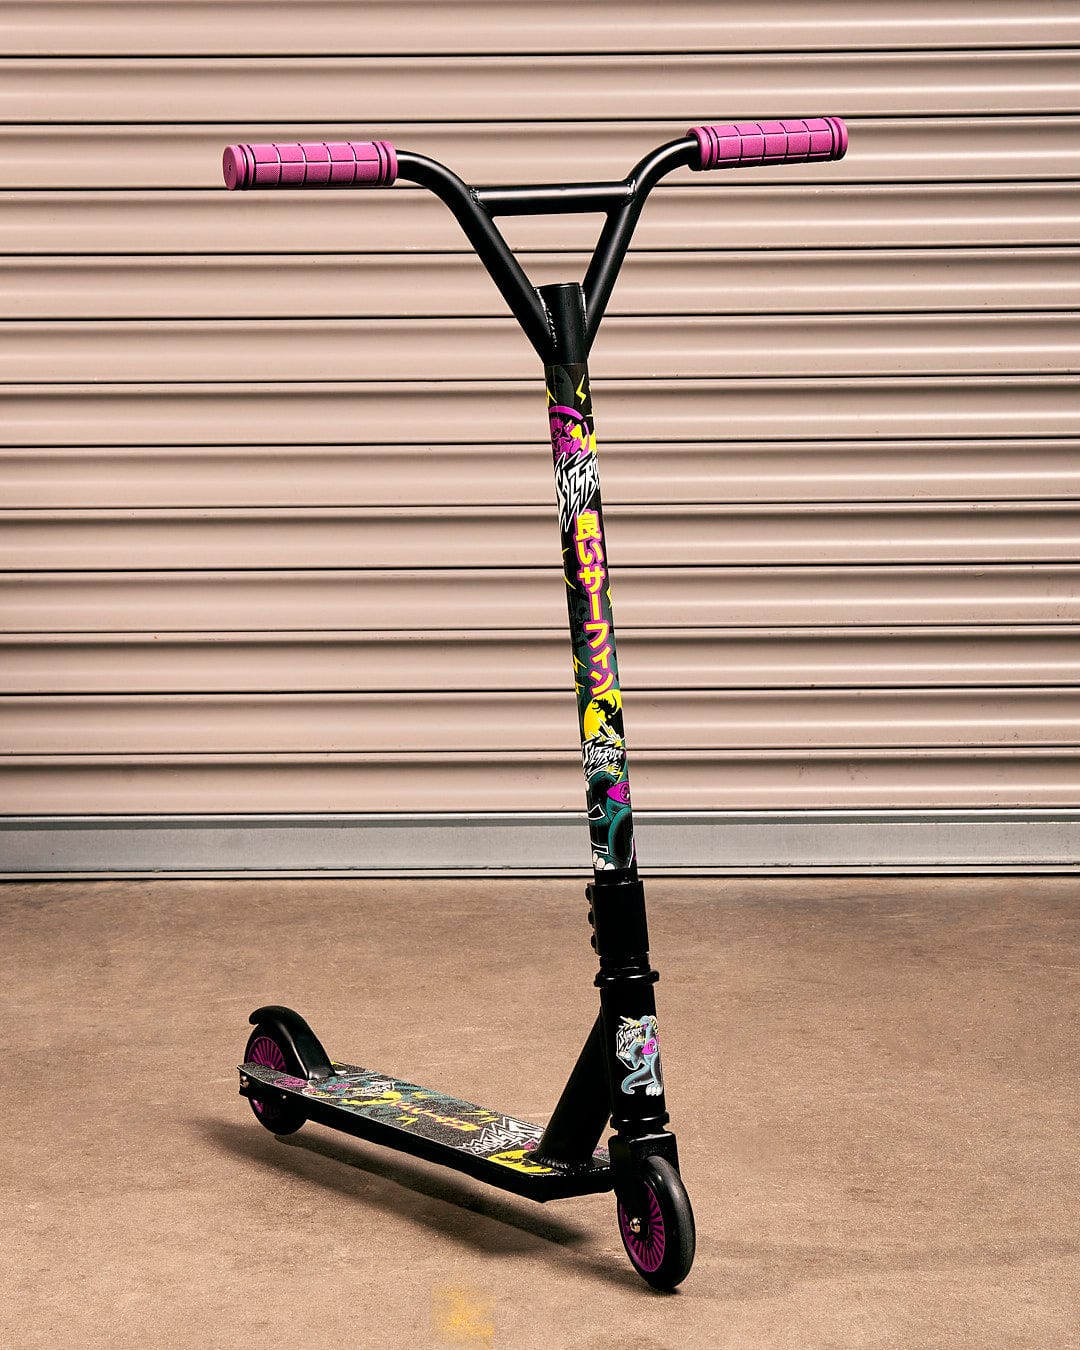 A Saltrock Tokyo Smackdown - Stunt Scooter - Black and purple with a pink handlebar.